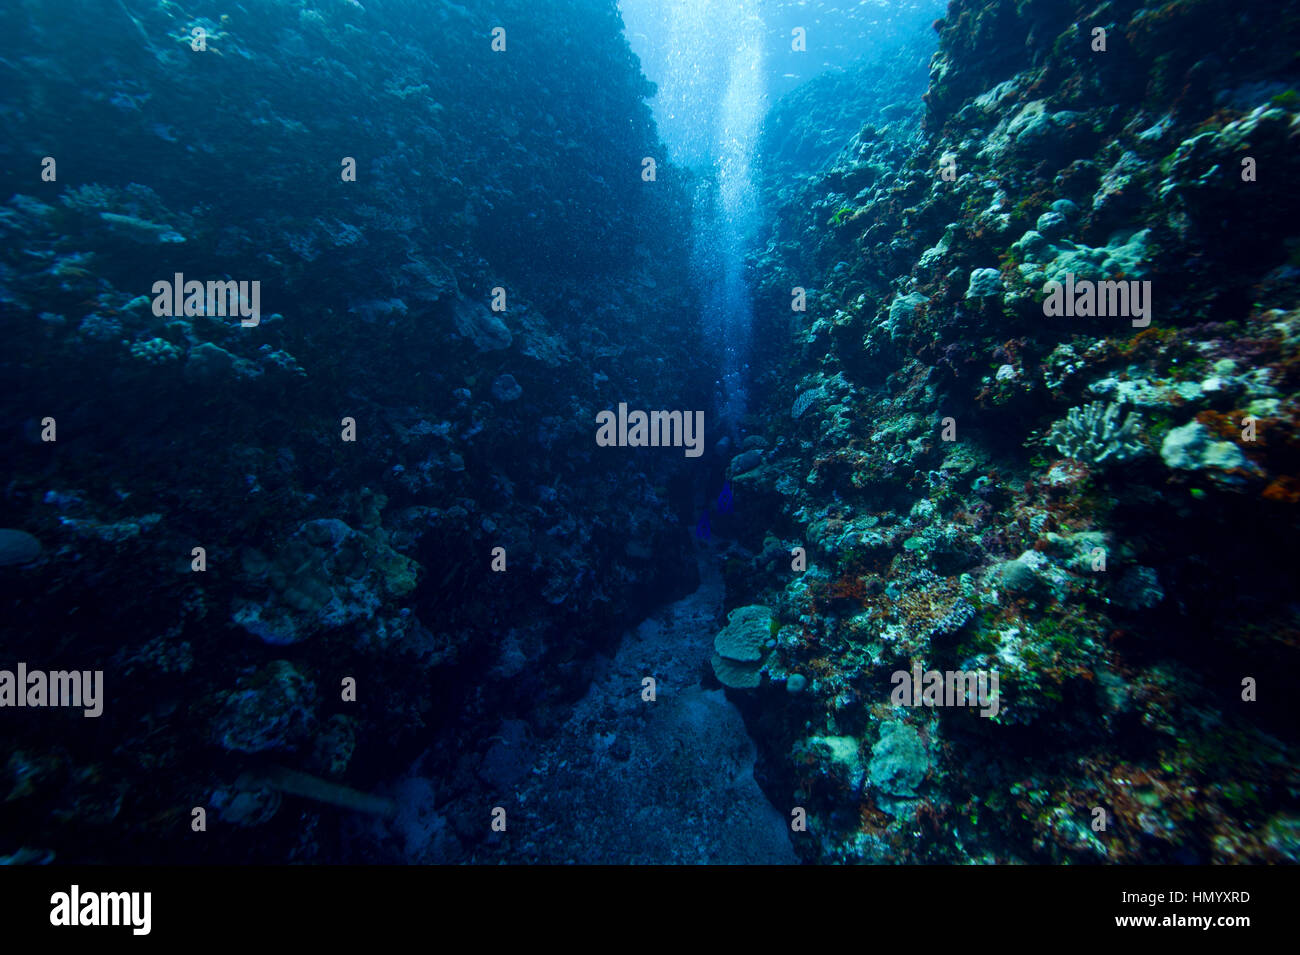 Scuba divers swimming through a coral canyon in a tropical reef. Stock Photo